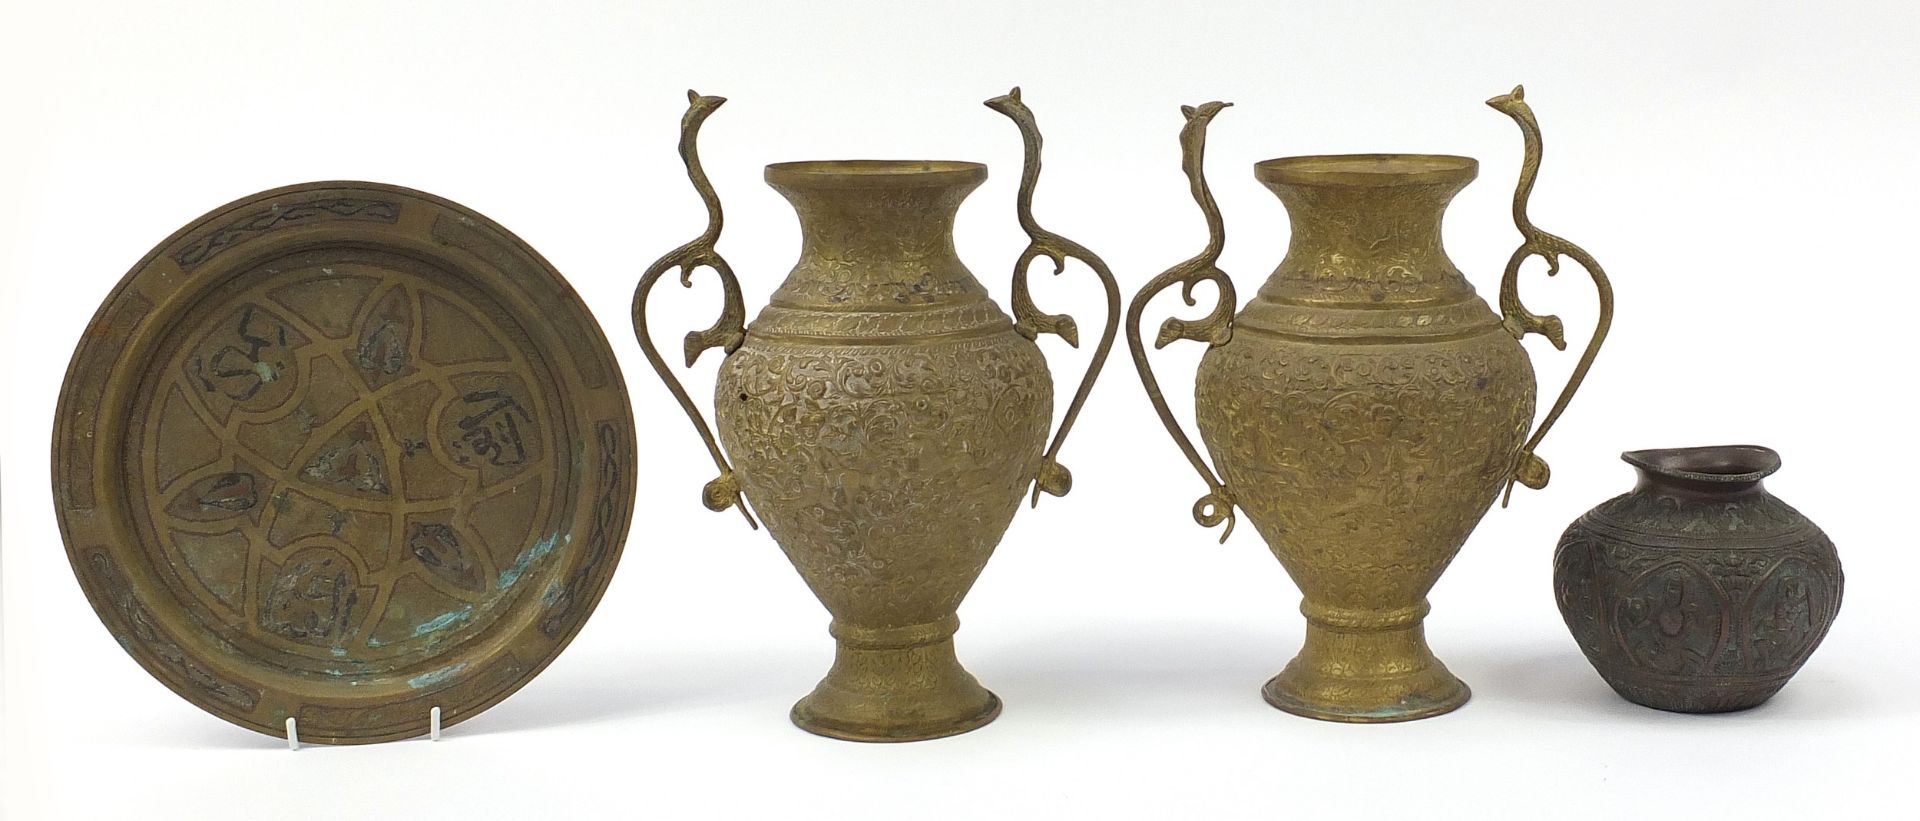 Indian and Middle Eastern metalware including a pair of vases with serpent handles decorated with